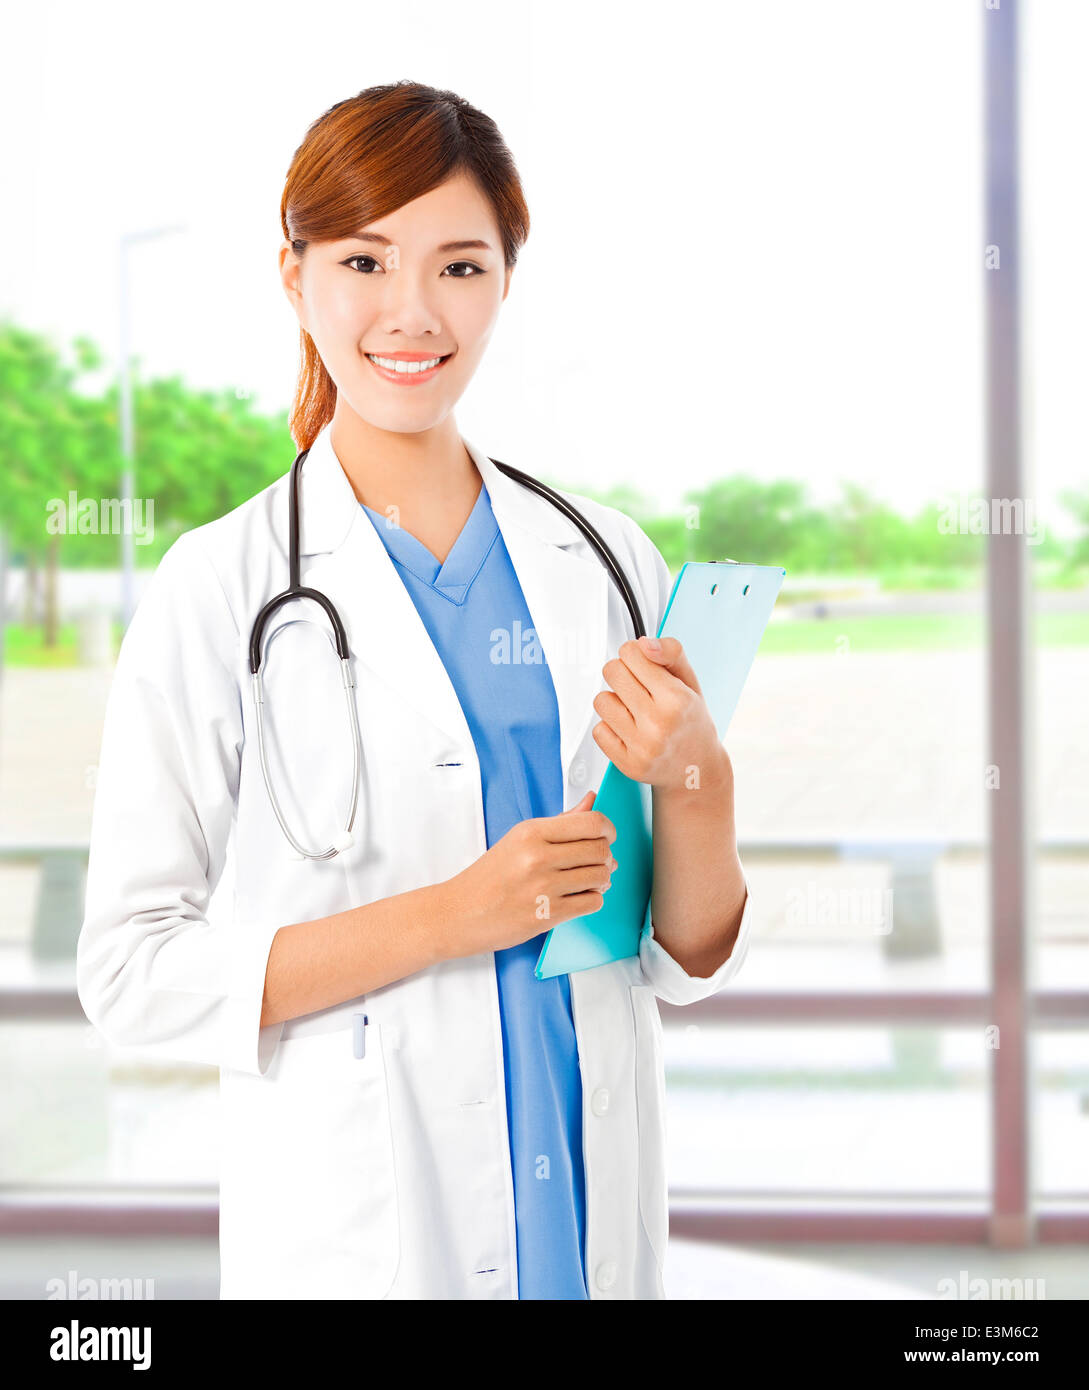 Pretty young female doctor standing and holding document Stock Photo